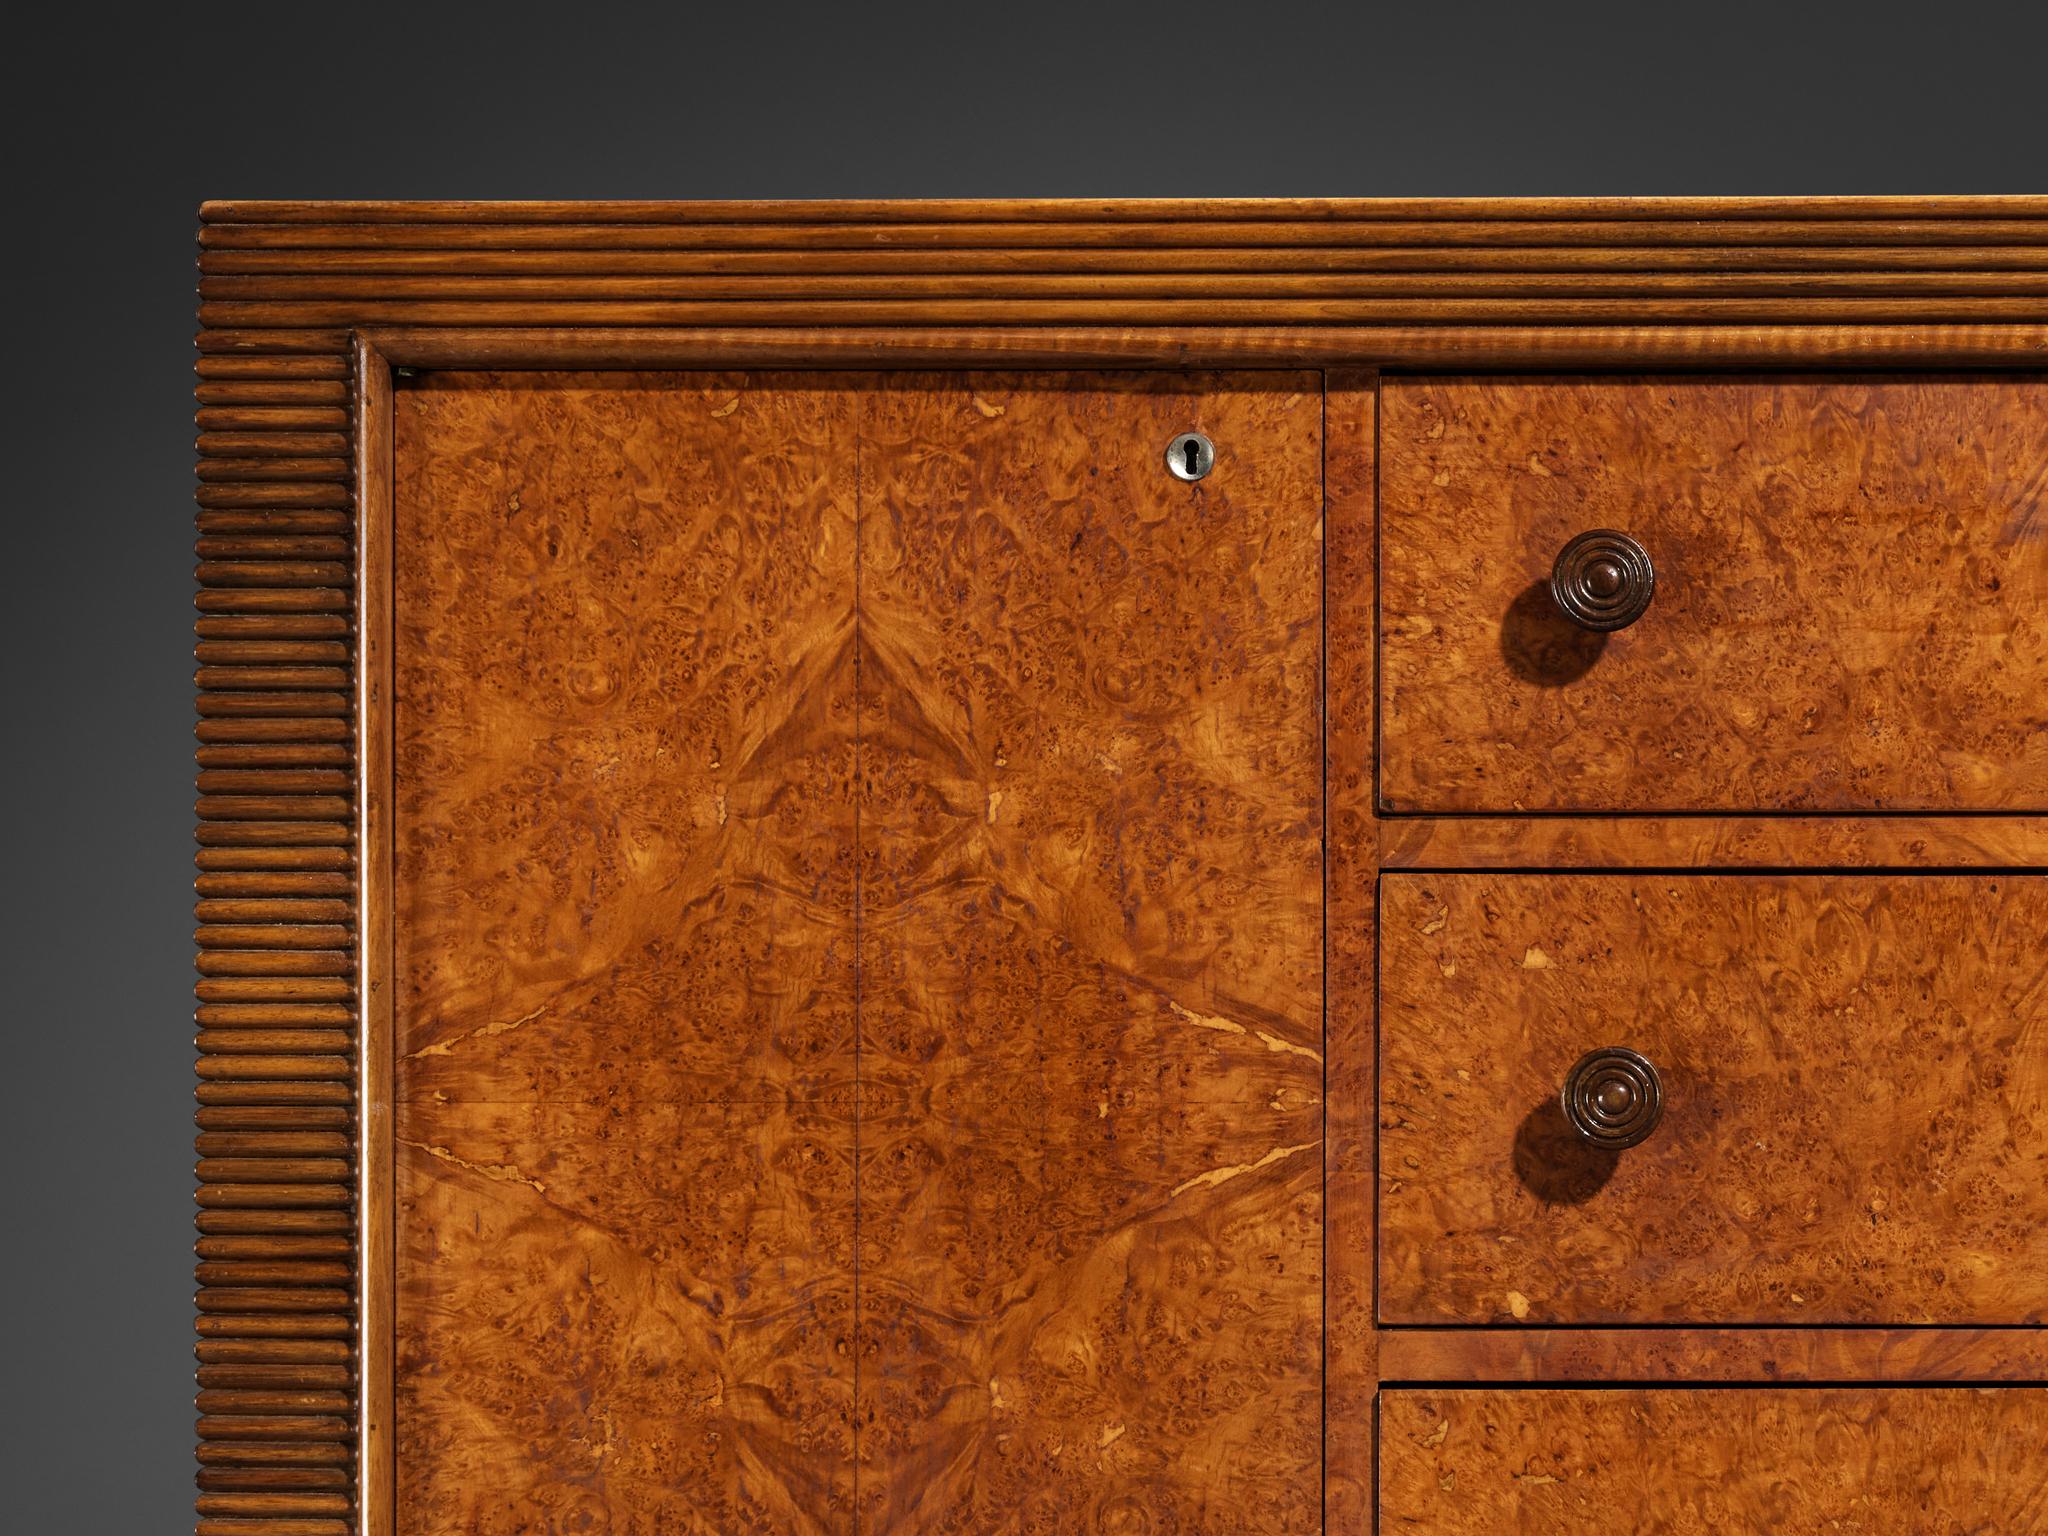 Italian Sideboard with Grissinato Carvings in Walnut